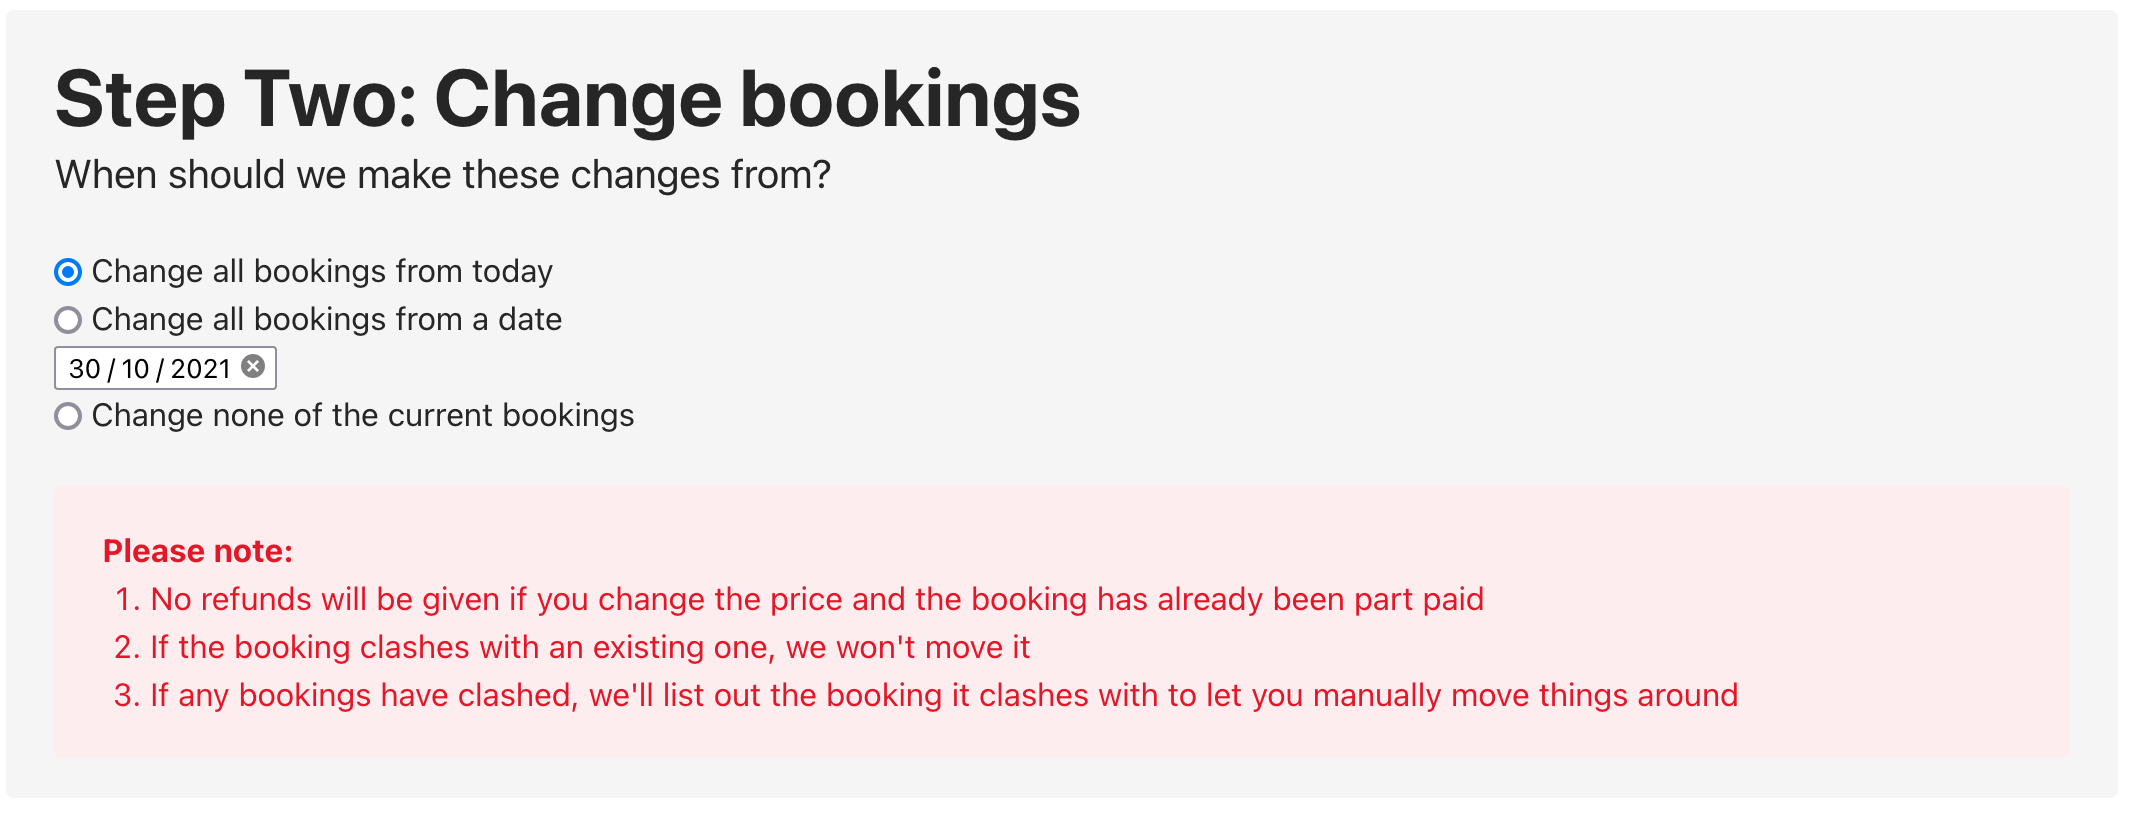 Picking bookings to change from